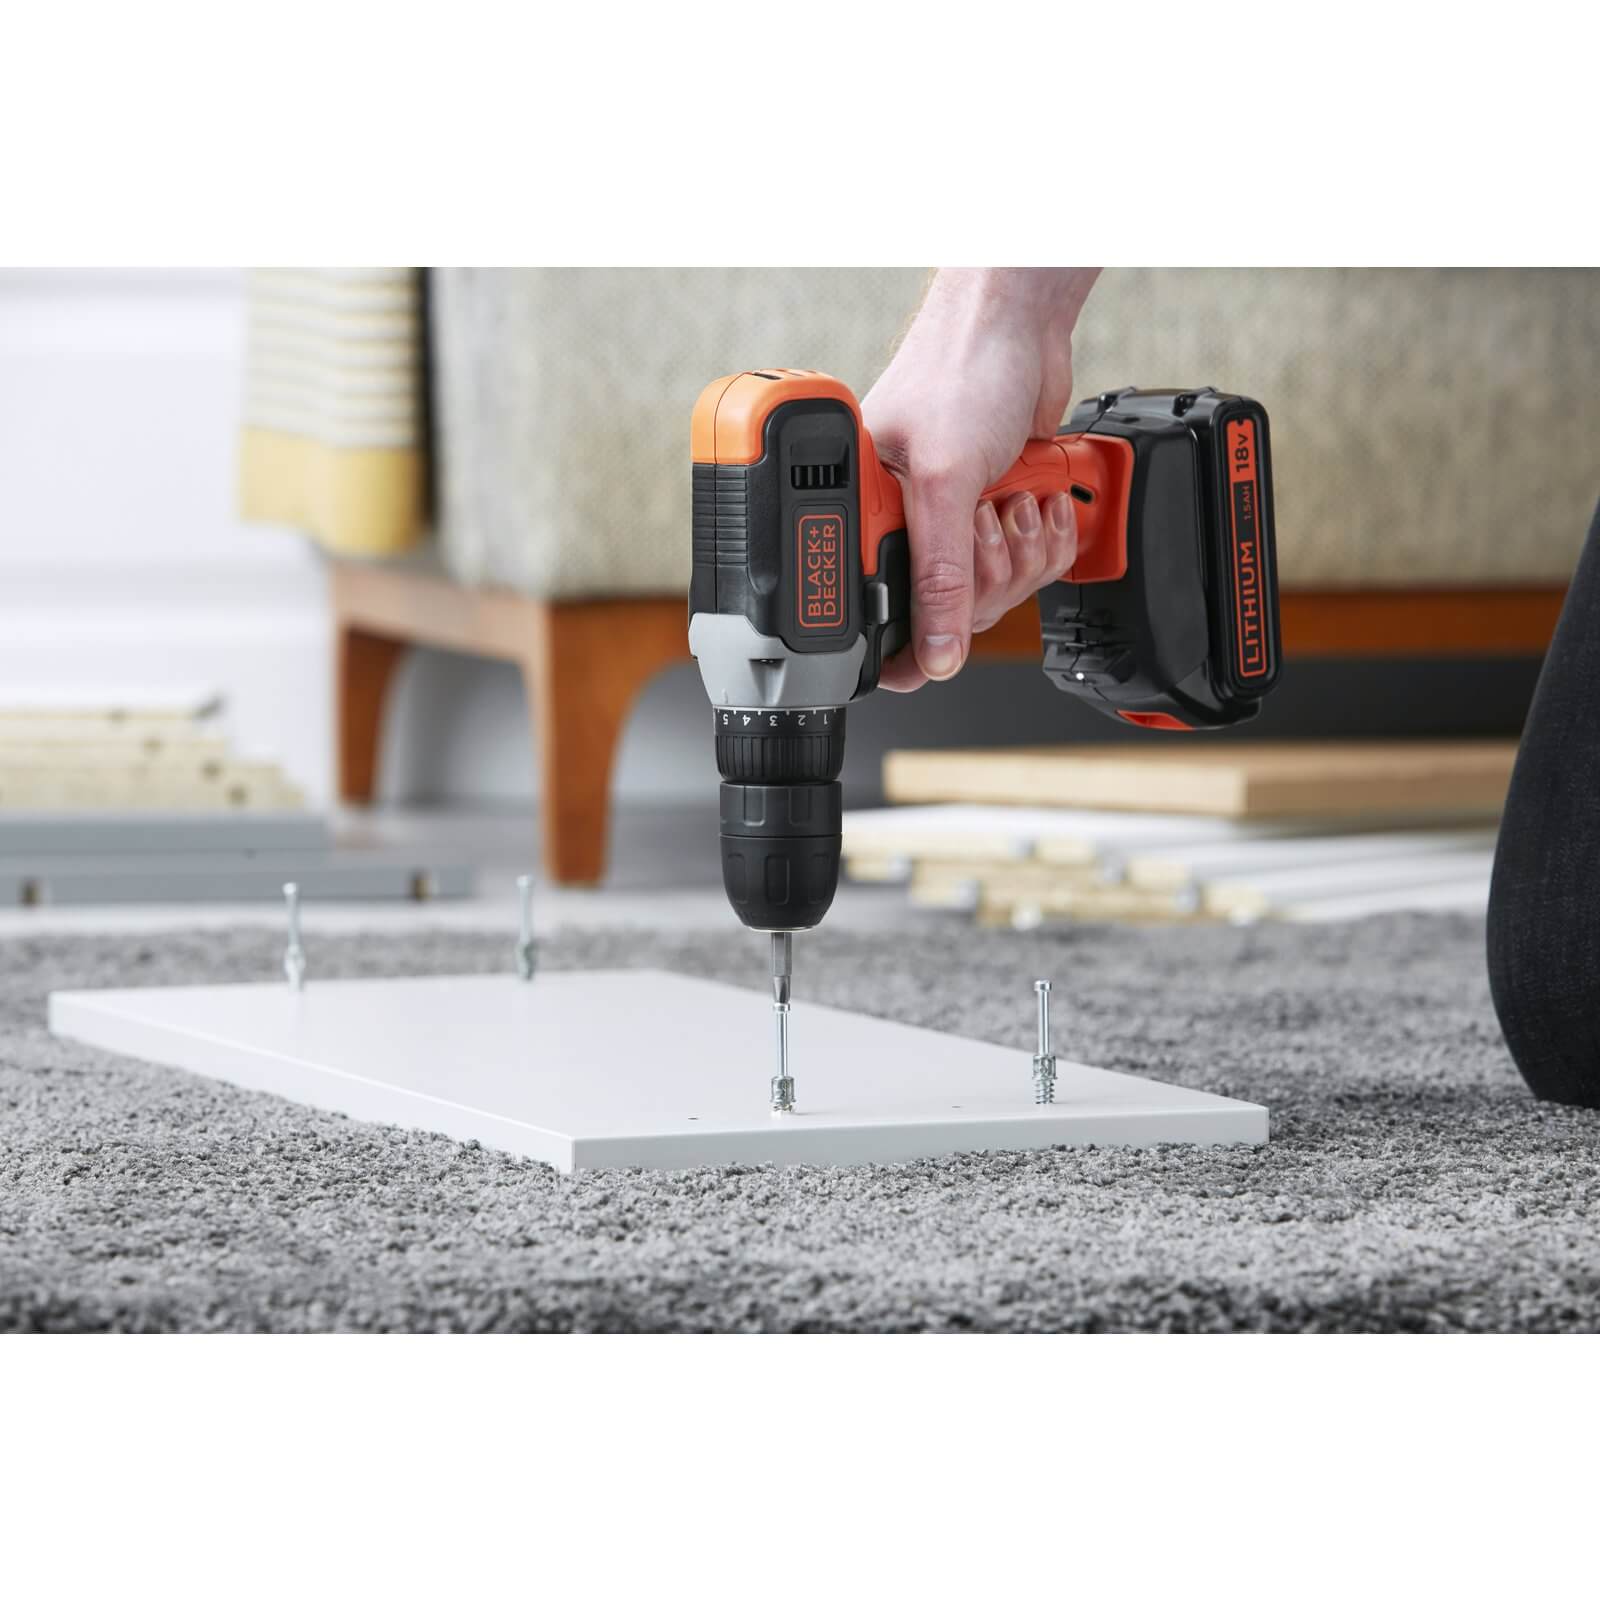 BLACK+DECKER 18V Cordless Drill Driver with Battery and Charger (BCD001C1-GB)